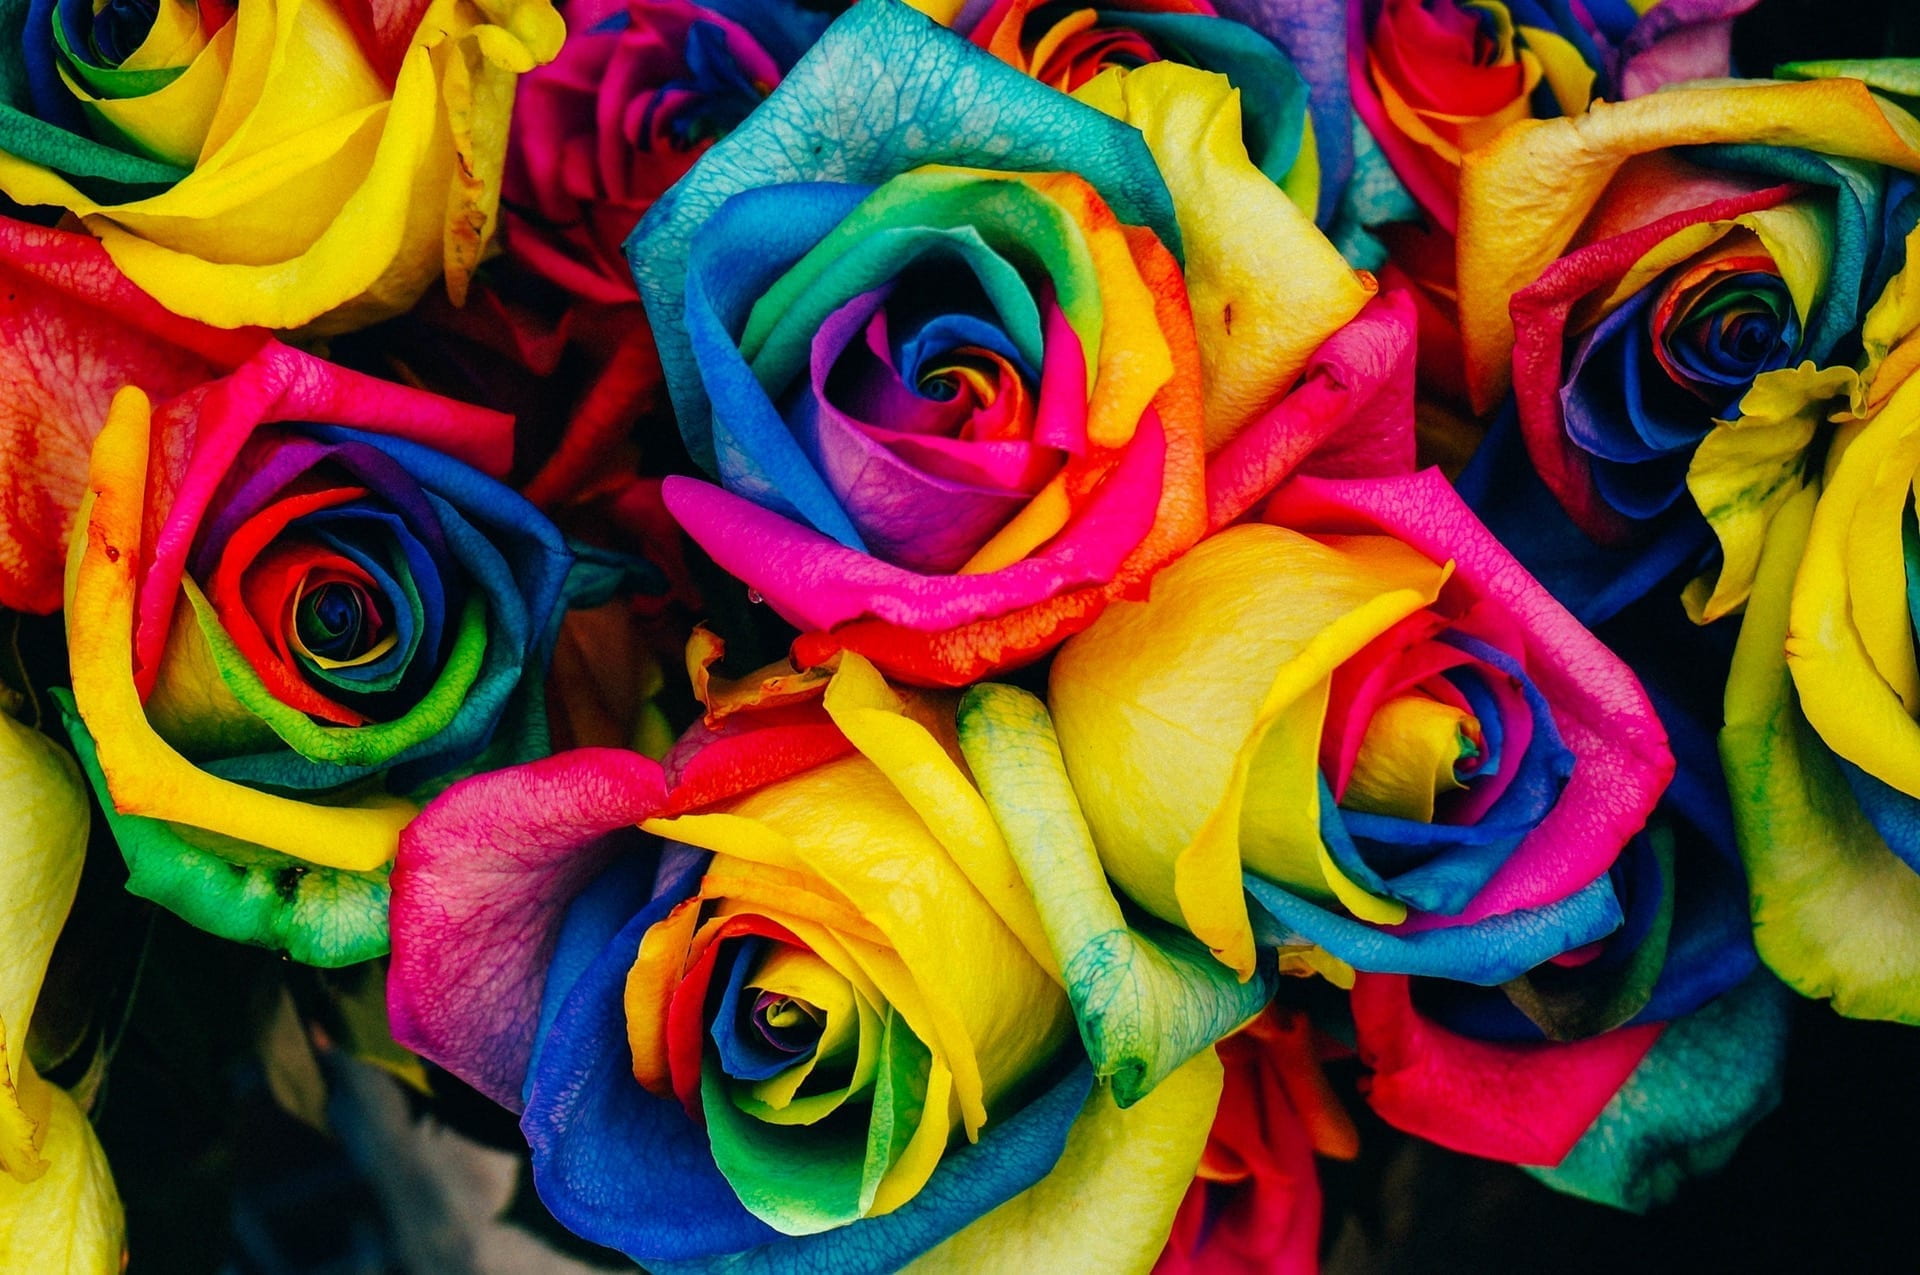 Group of rainbow coloured roses.